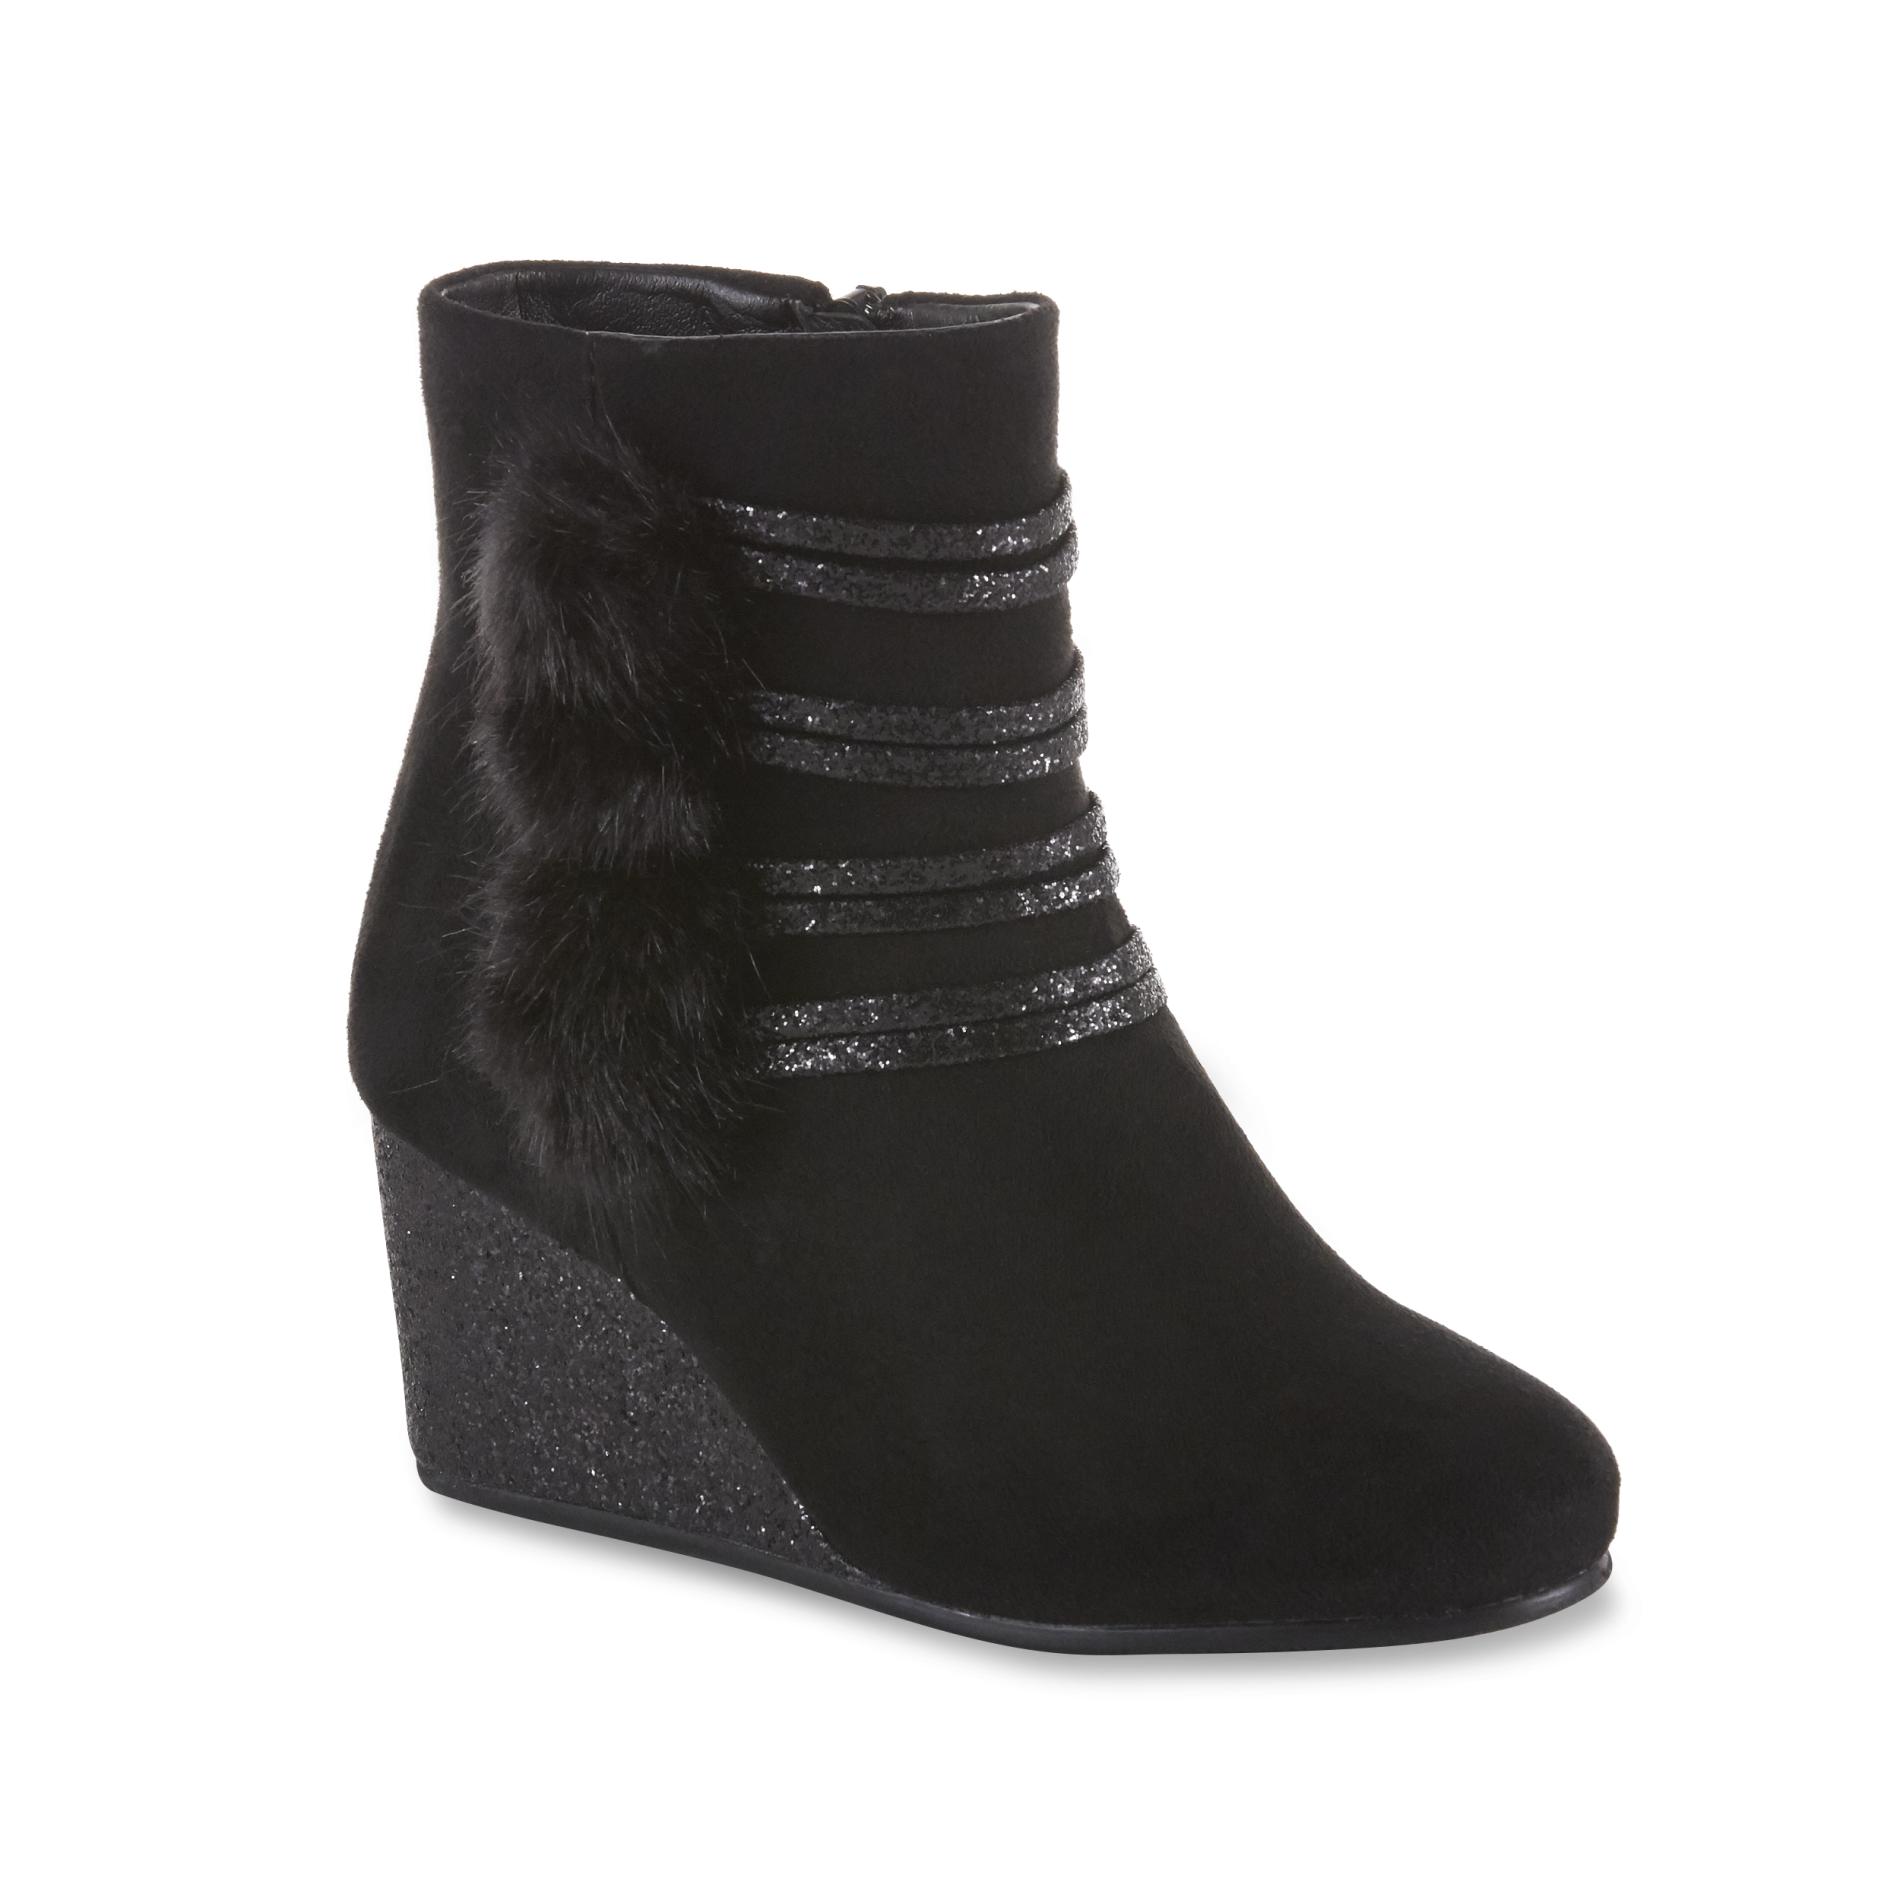 Simply Styled Girls' Tansy Wedge Bootie - Black